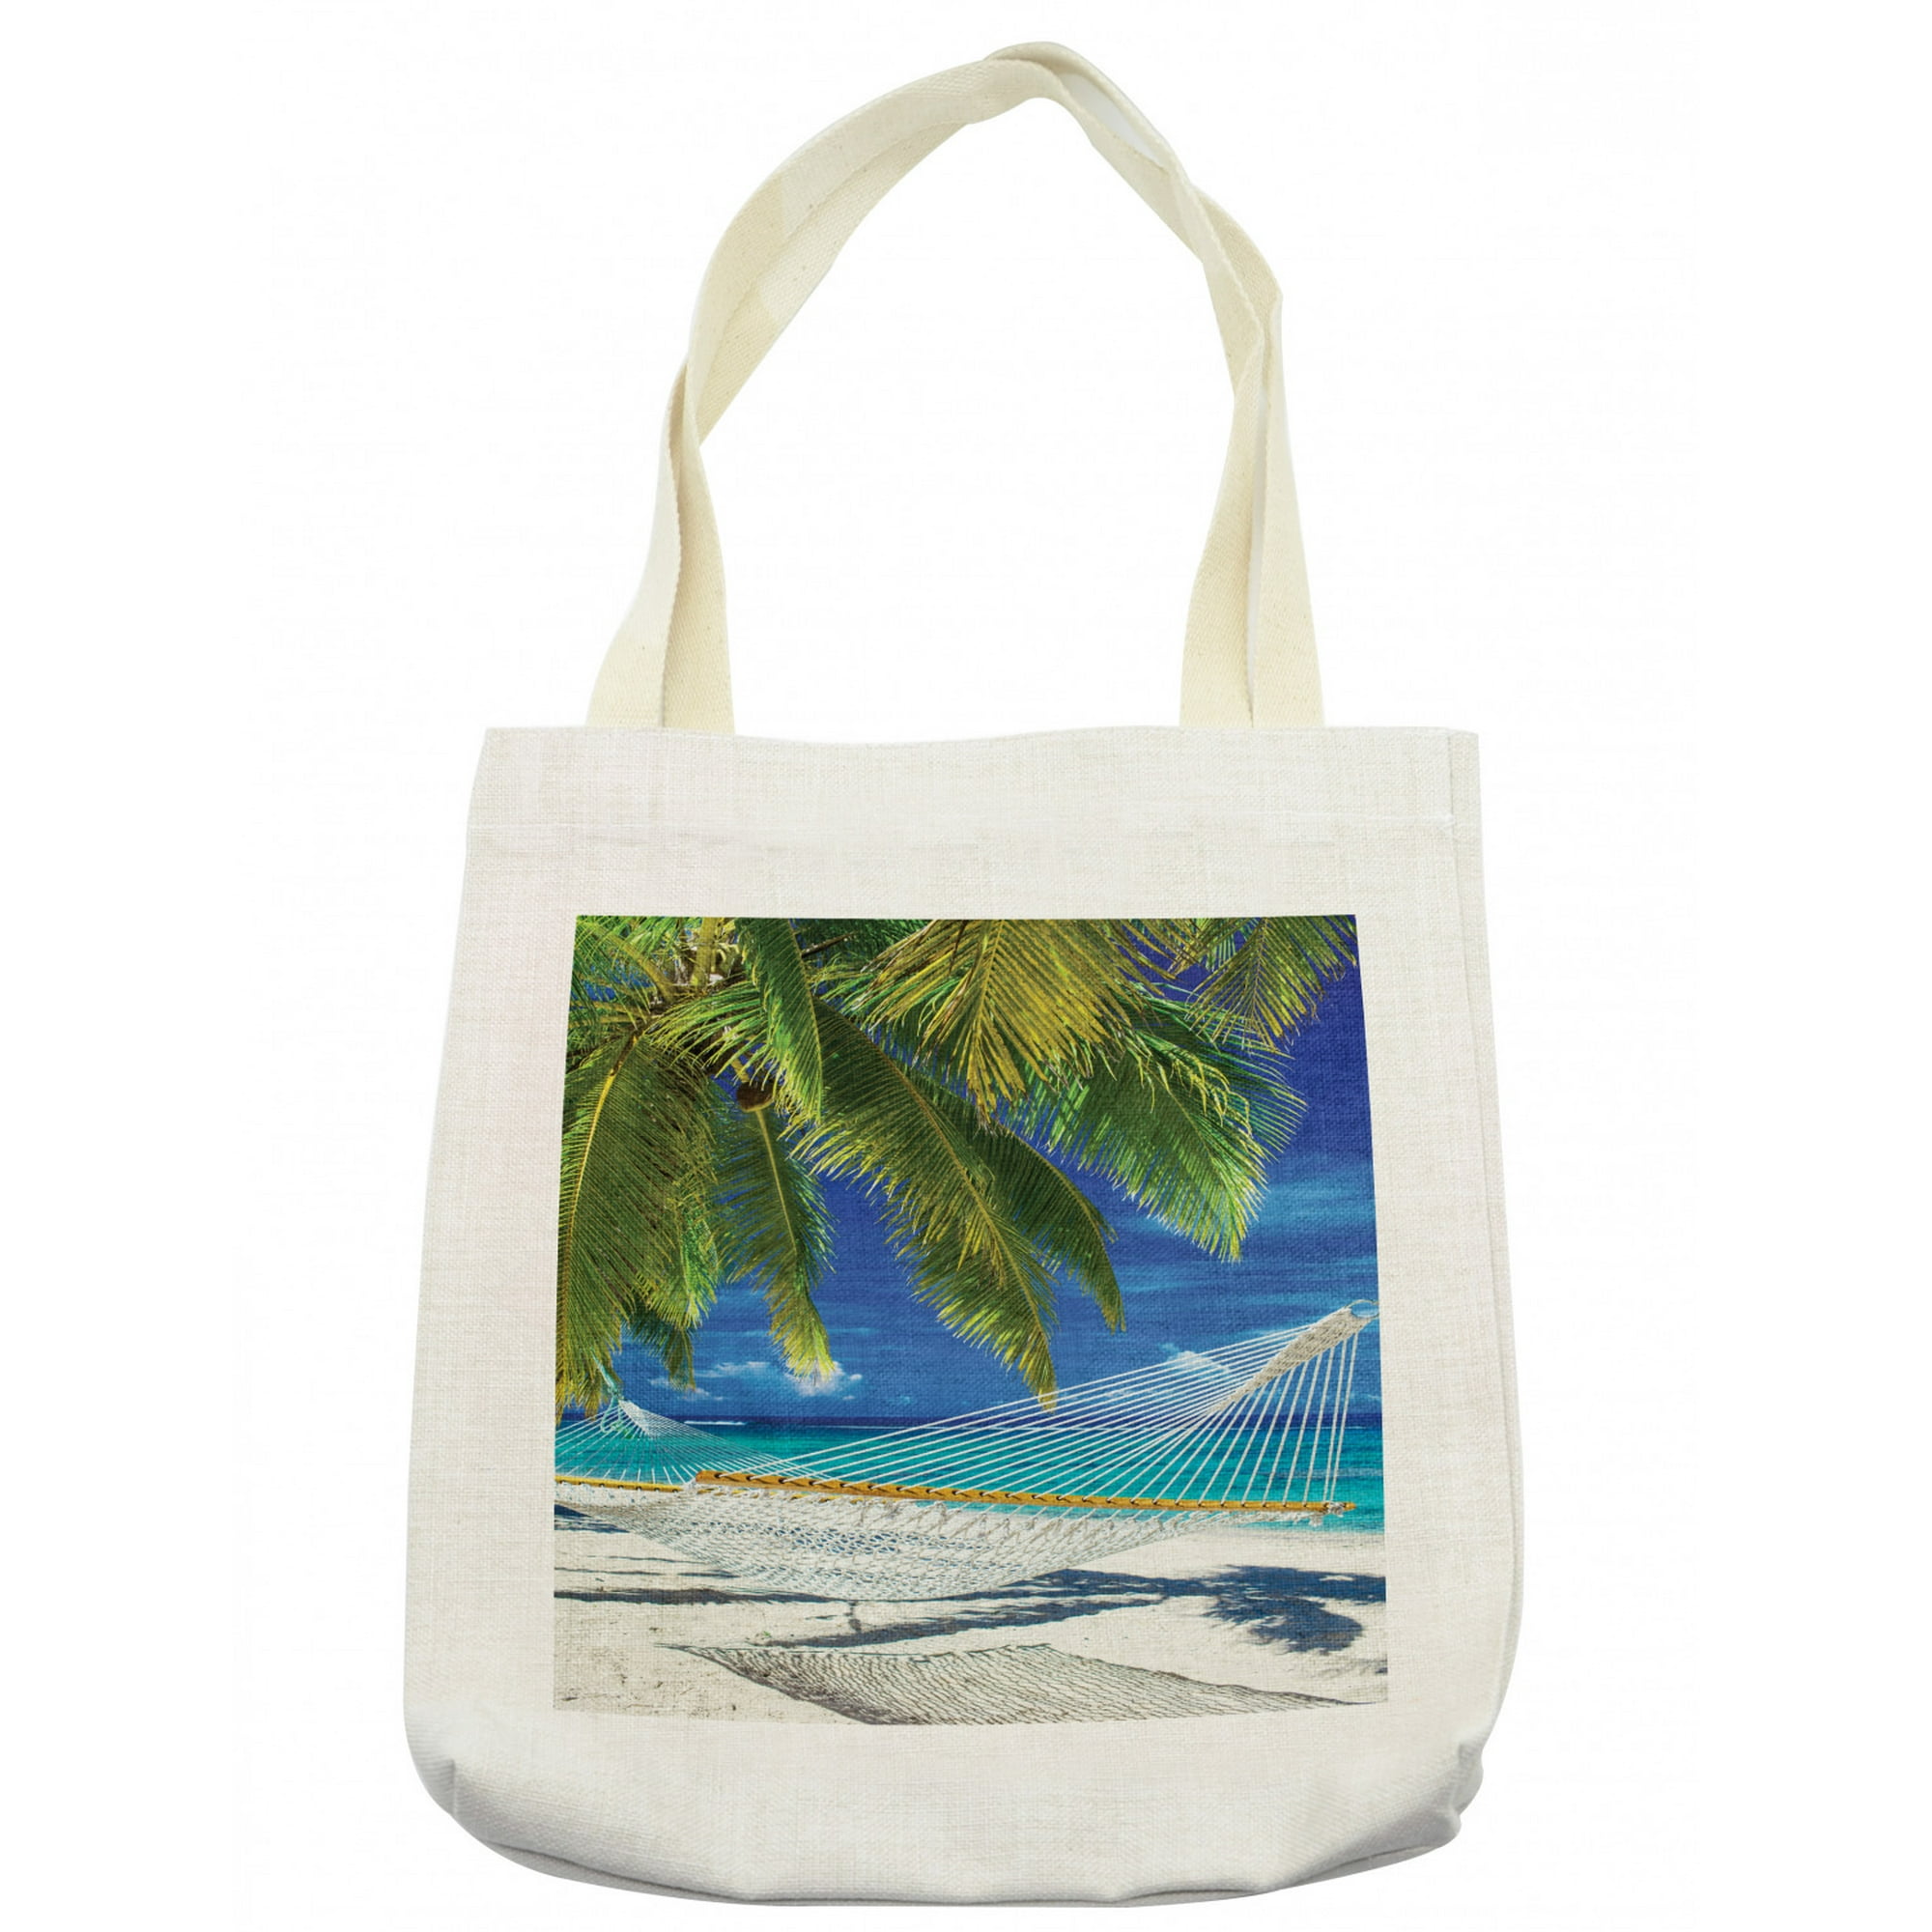 Beach Tote Bag, Hammock on The Sandy Beach Between Palm Coconut Overlooking Sea Nature Art, Cloth Linen Reusable Bag for Shopping Books Beach and More